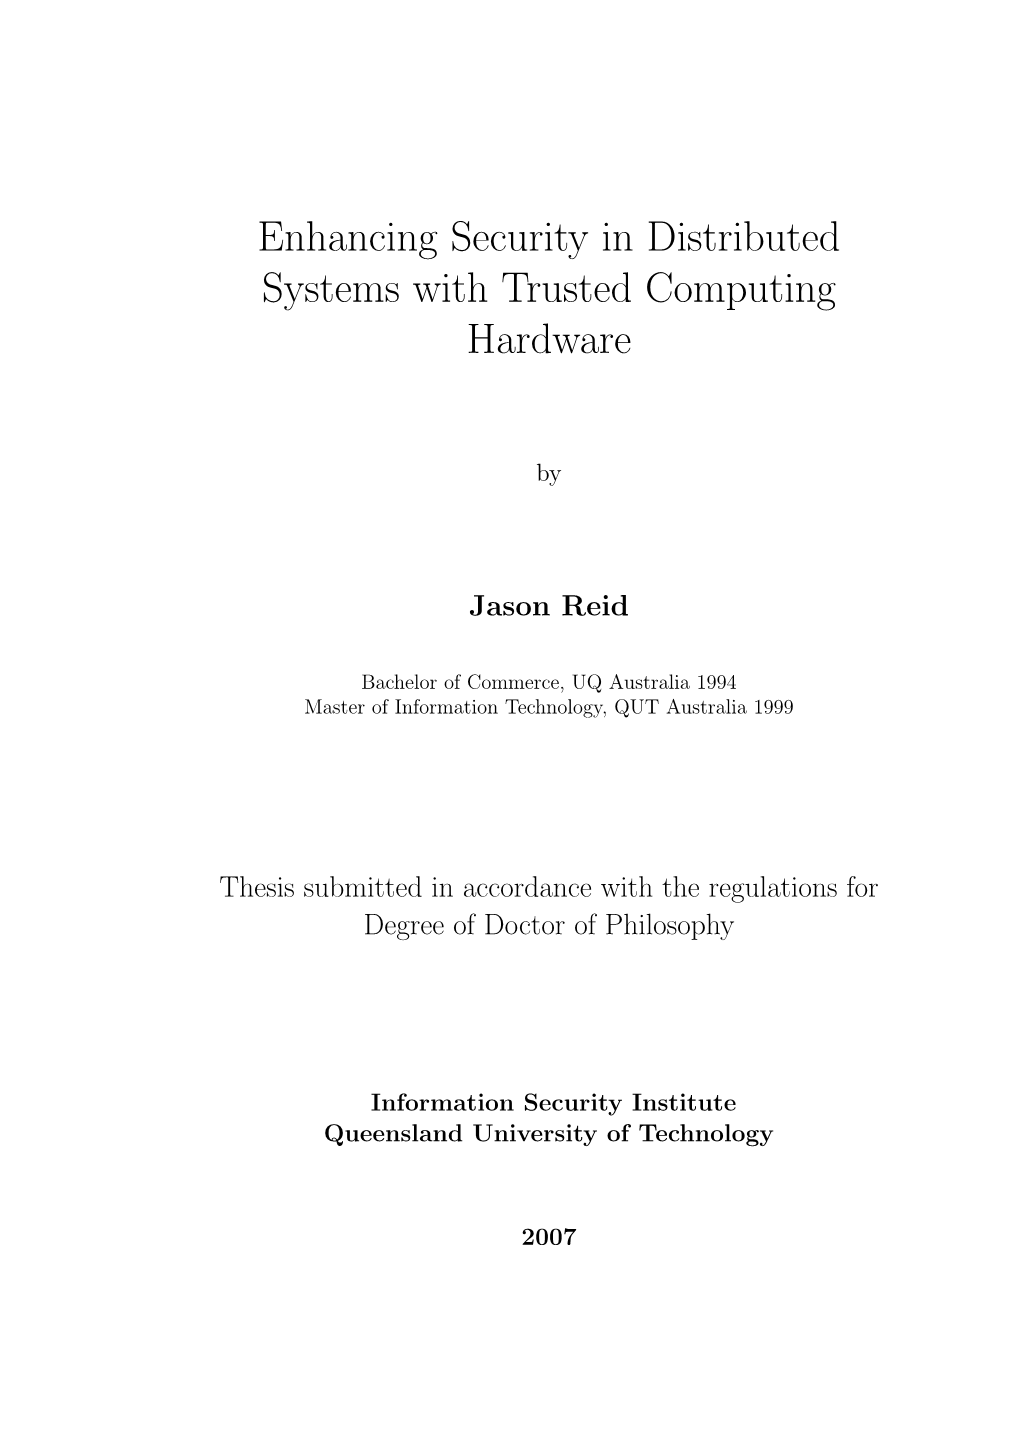 Enhancing Security in Distributed Systems with Trusted Computing Hardware